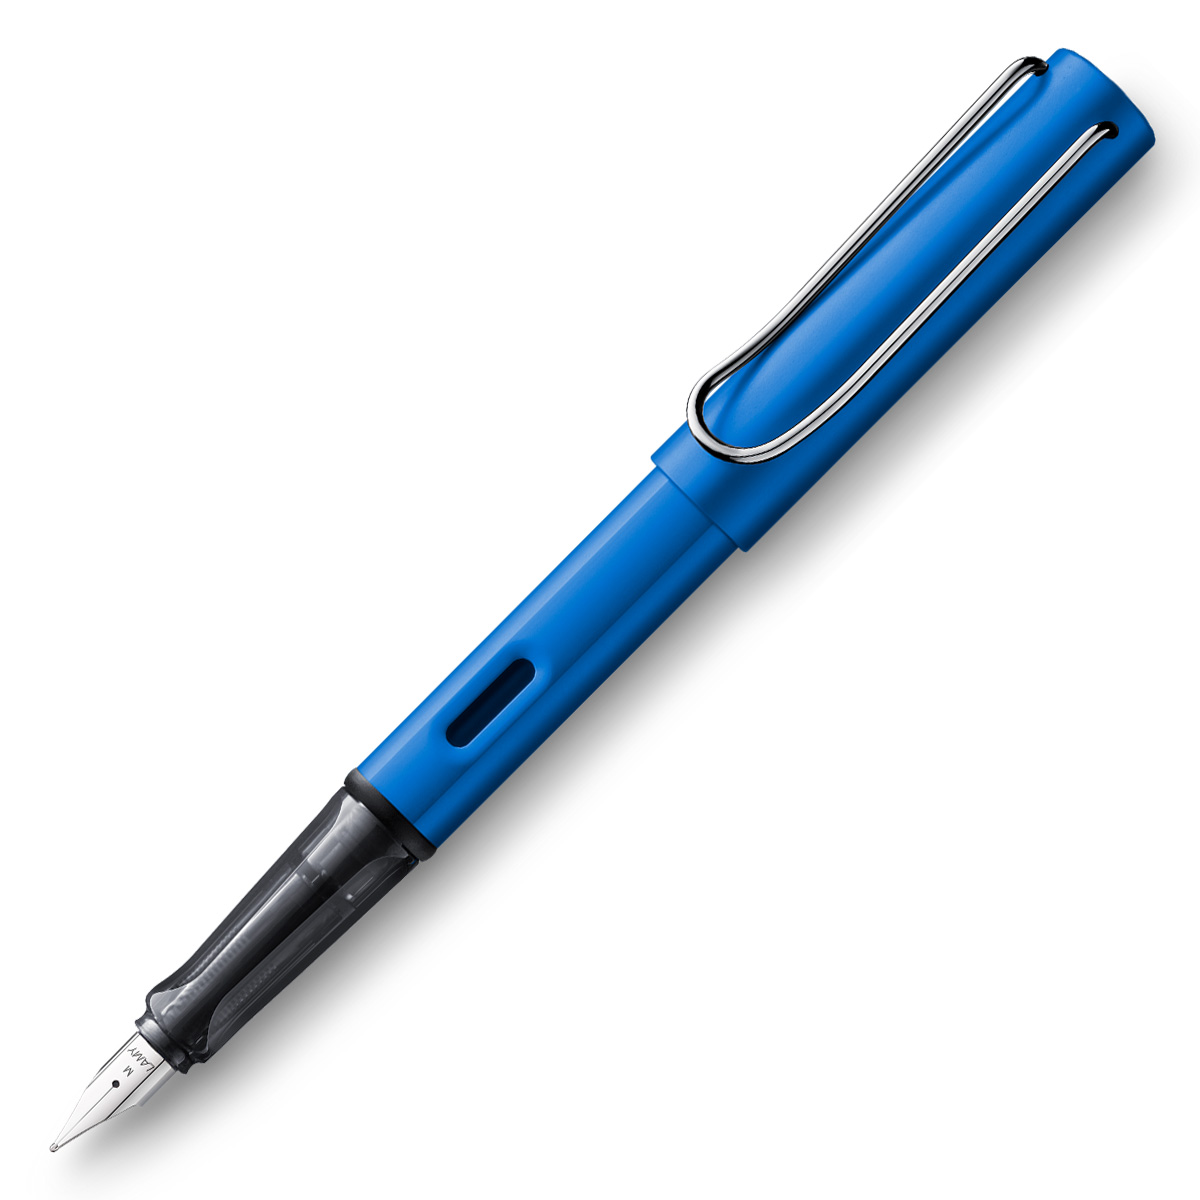 AL-star Fountain pen Oceanblue in the group Pens / Fine Writing / Gift Pens at Pen Store (101801_r)